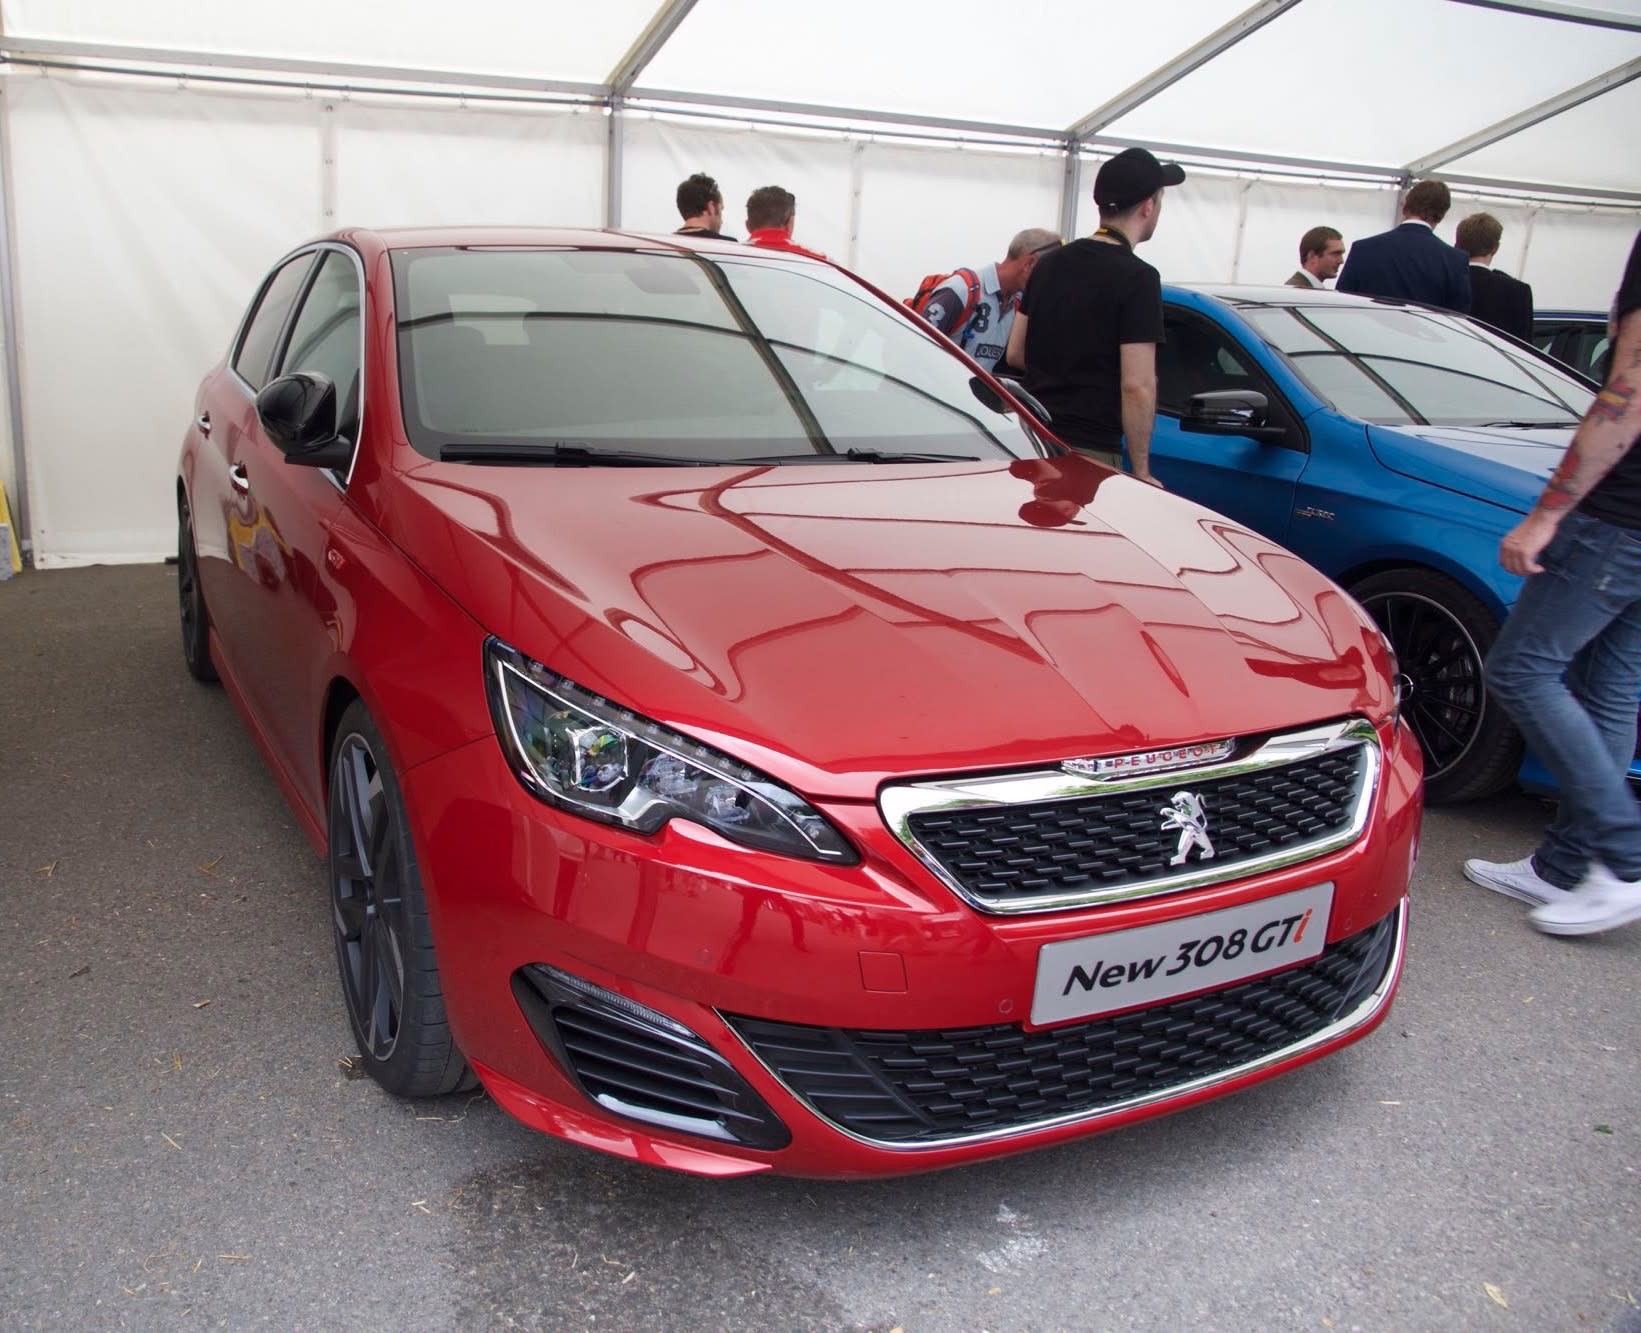 Peugeot 308 GTi Photos and Specs. Photo: 308 GTi Peugeot tuning and 23  perfect photos of Peugeot 308 GTi